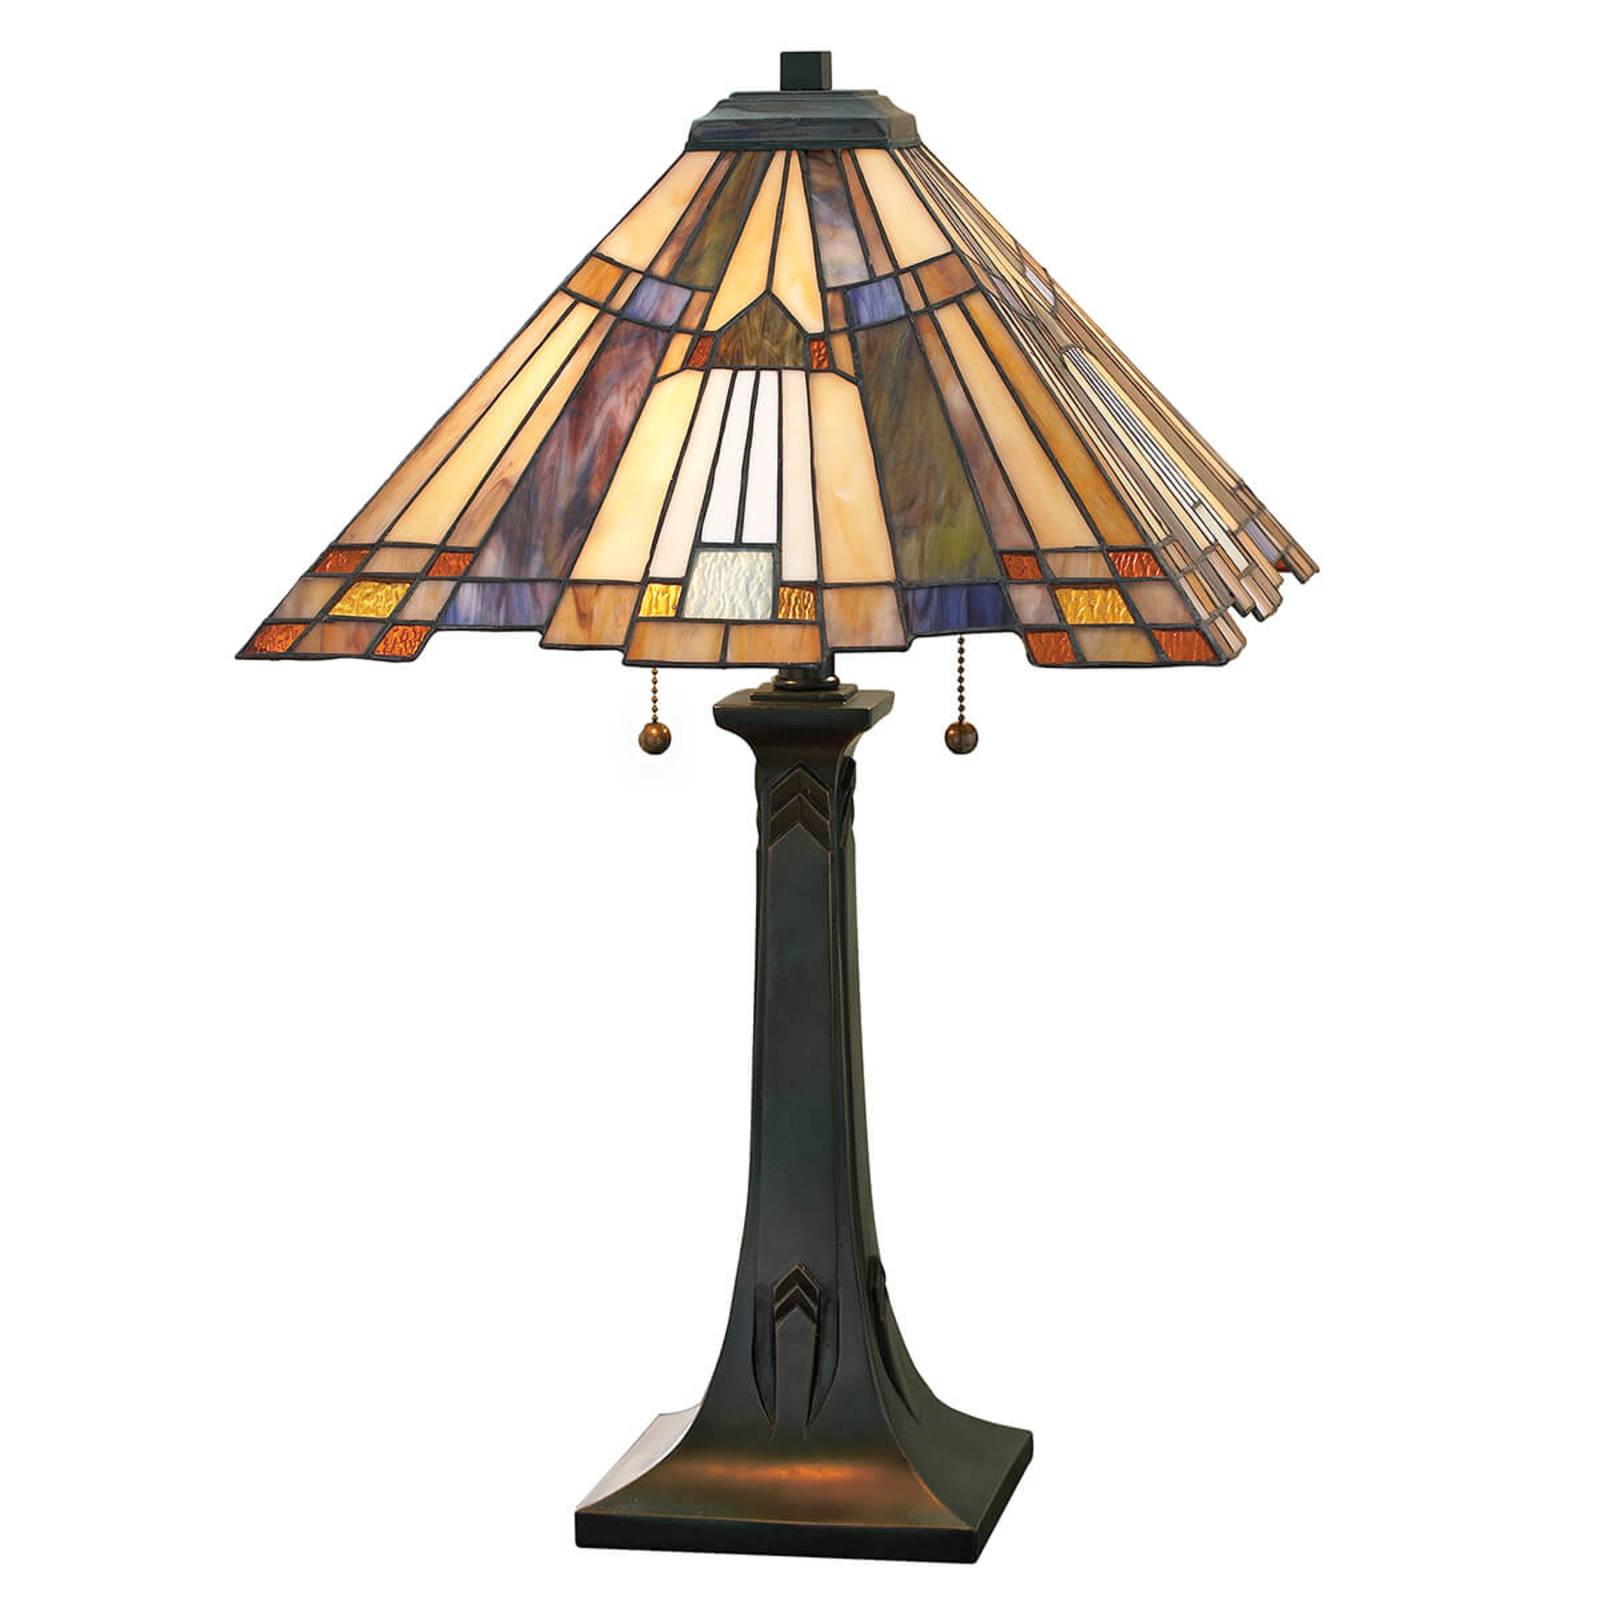 Photos - Desk Lamp Quoizel Pretty table lamp Inglenook in a Tiffany style 